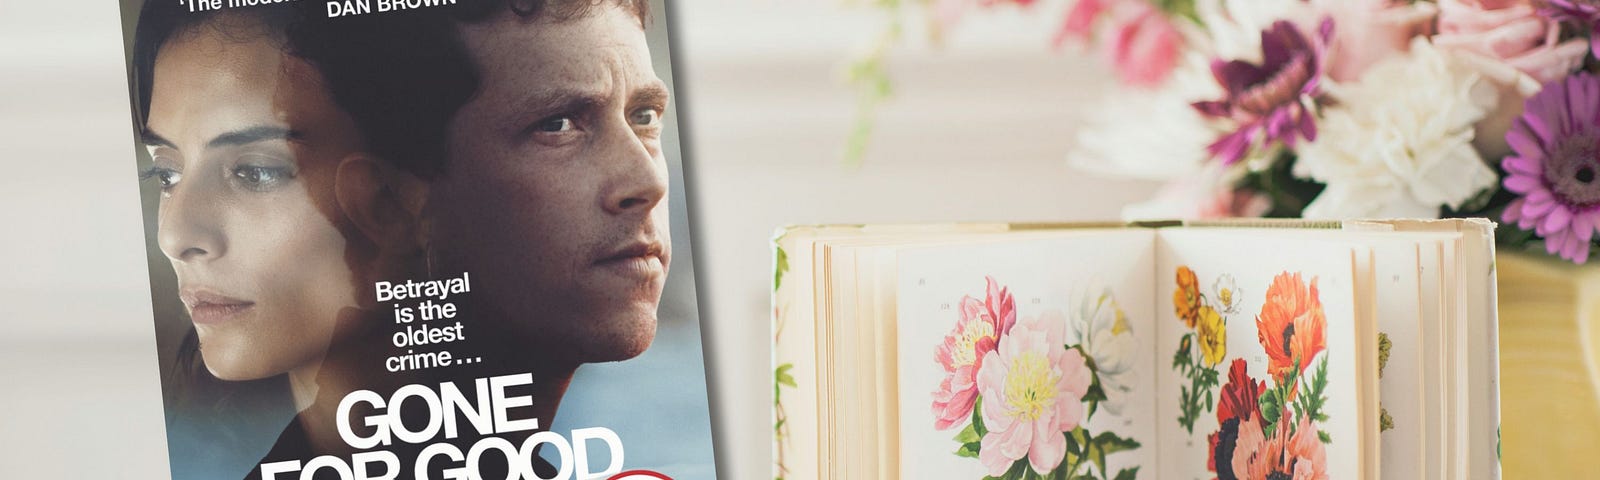 A floral background with a floral book on the left side. On the right side, the book cover by Gone for Good by Harlan Coben, featuring the profiles of a man and a woman, looking in different directions.